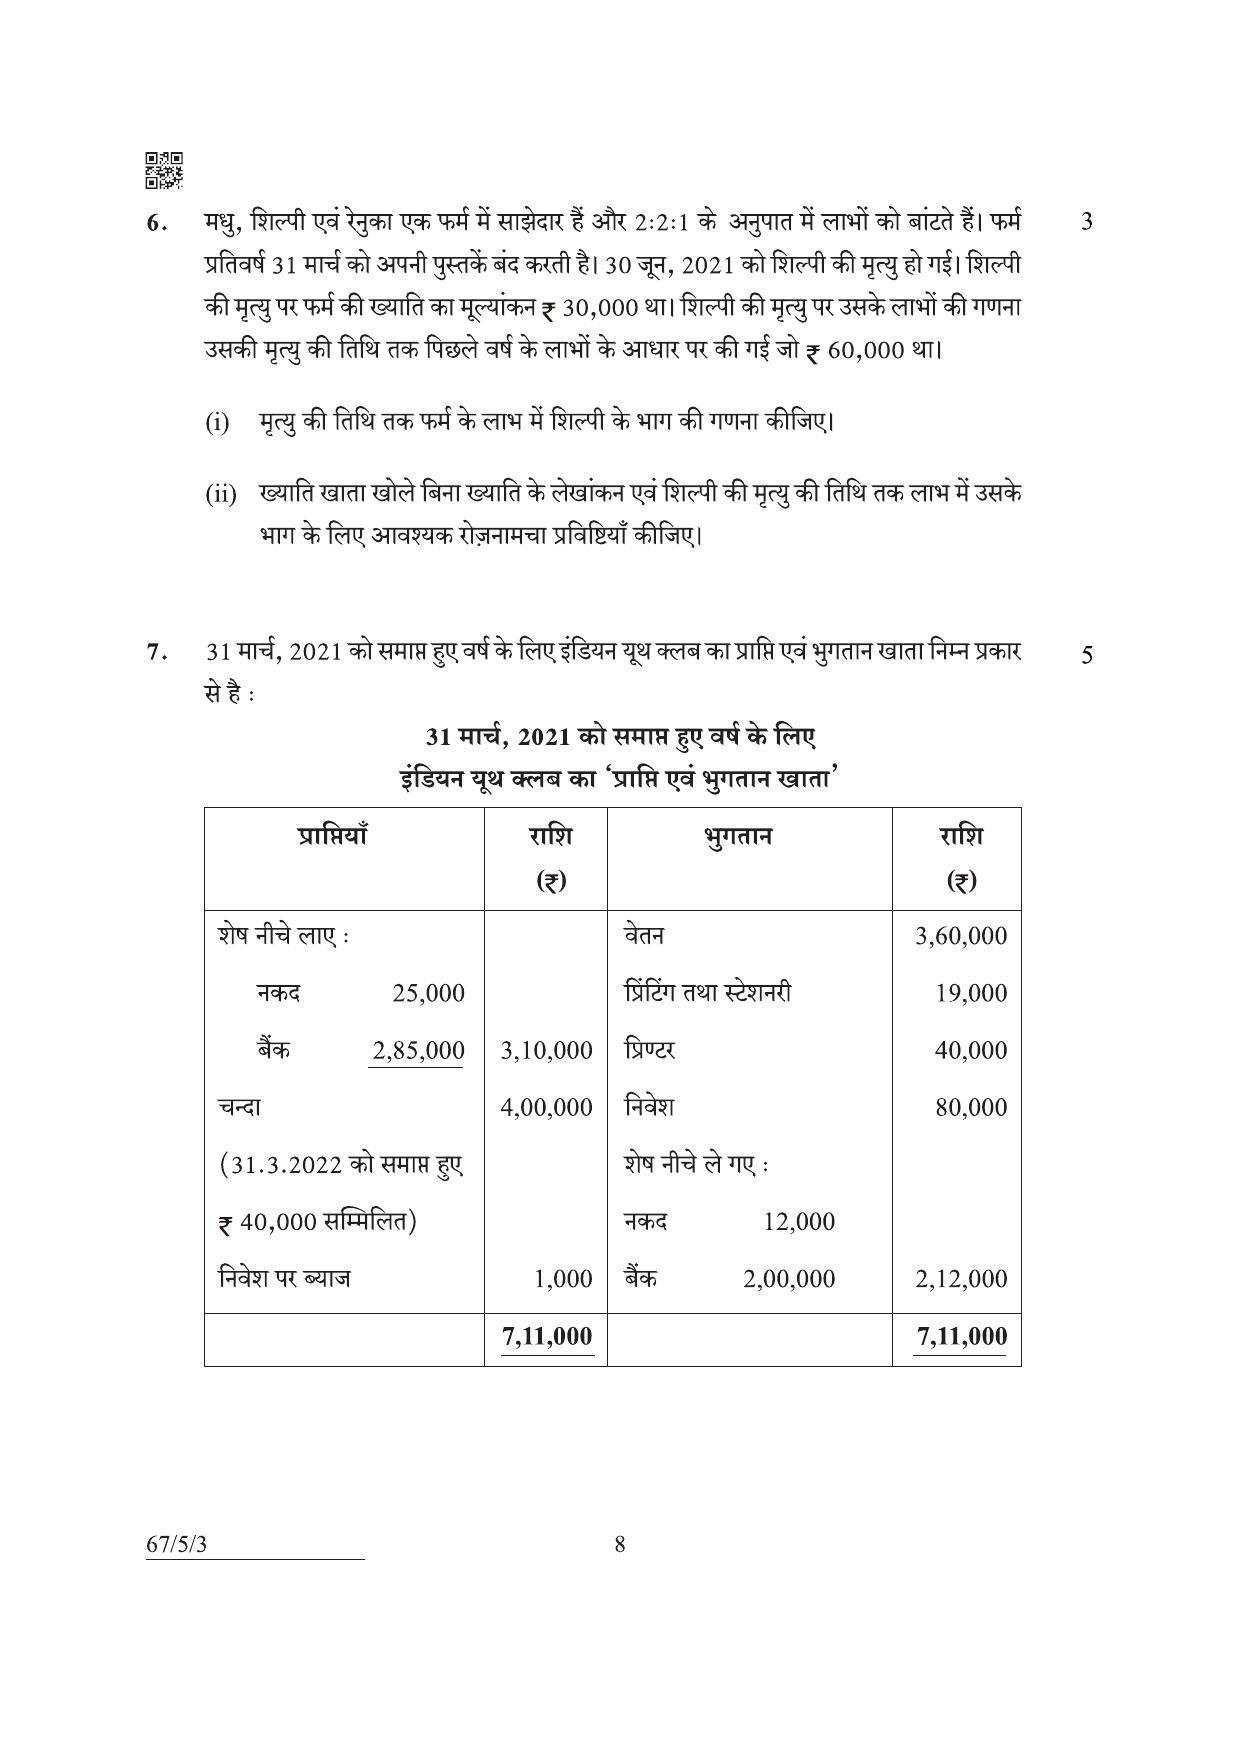 CBSE Class 12 67-5-3 Accountancy 2022 Question Paper - Page 8